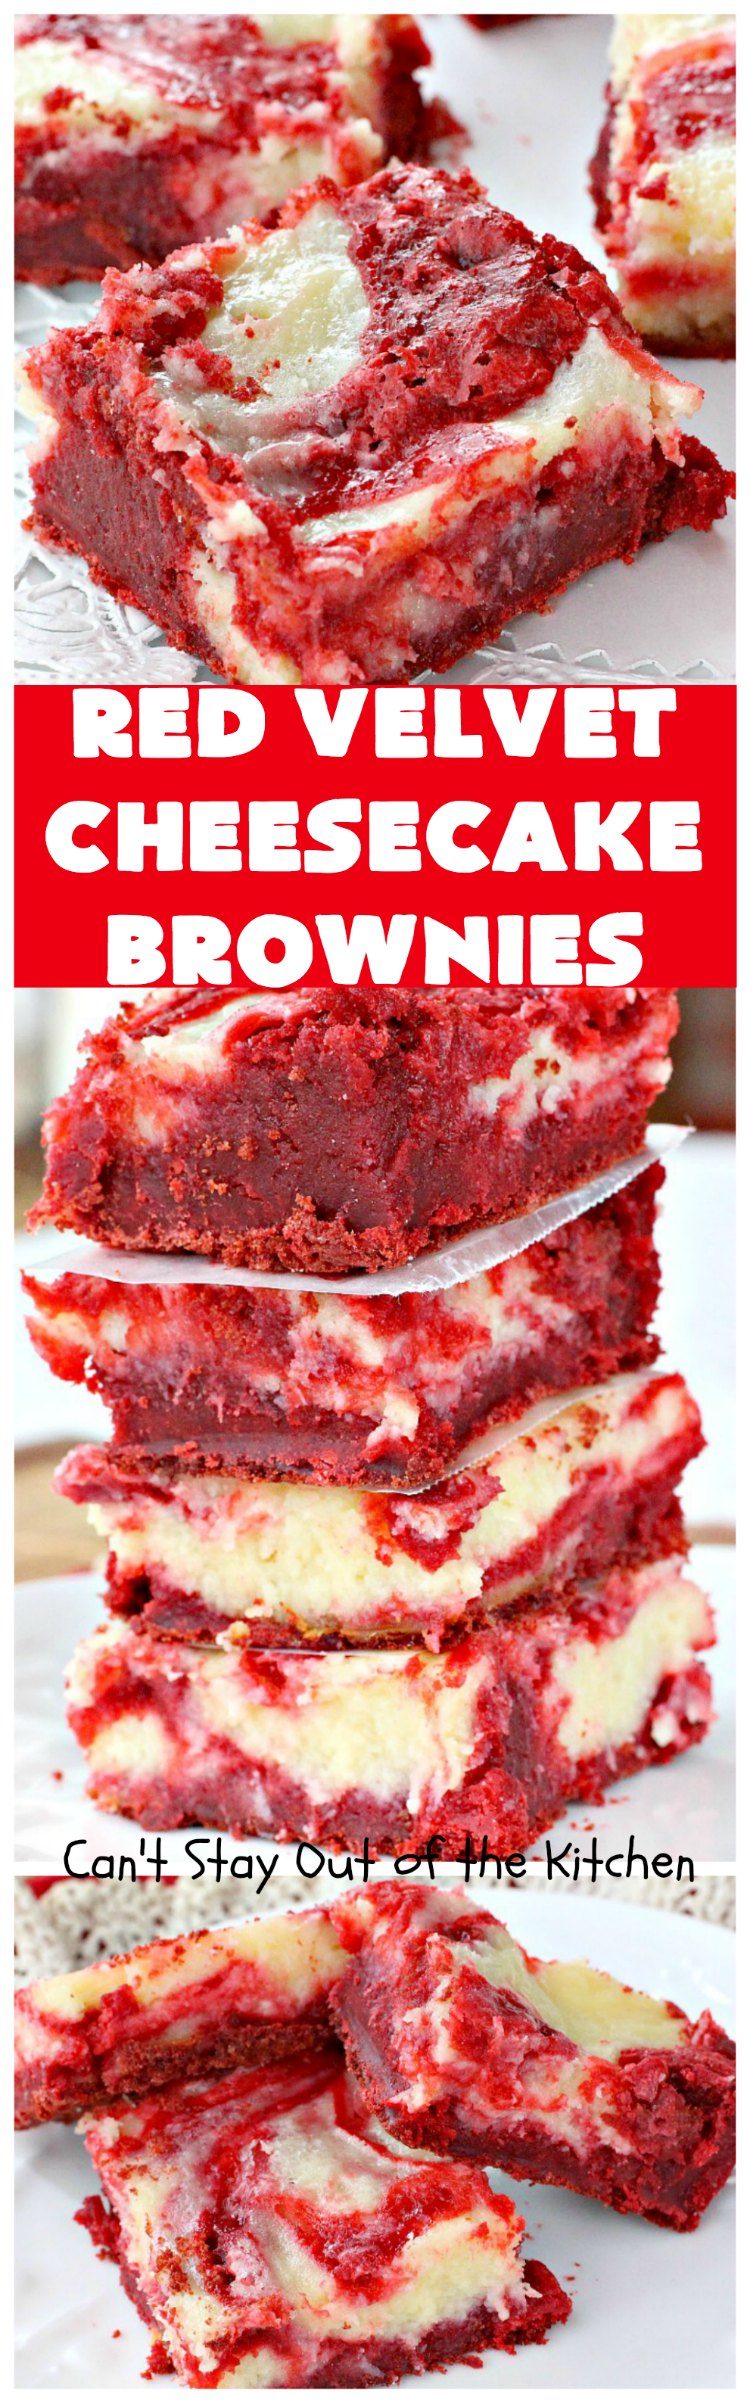 Red Velvet Cheesecake Brownies | Can't Stay Out of the Kitchen